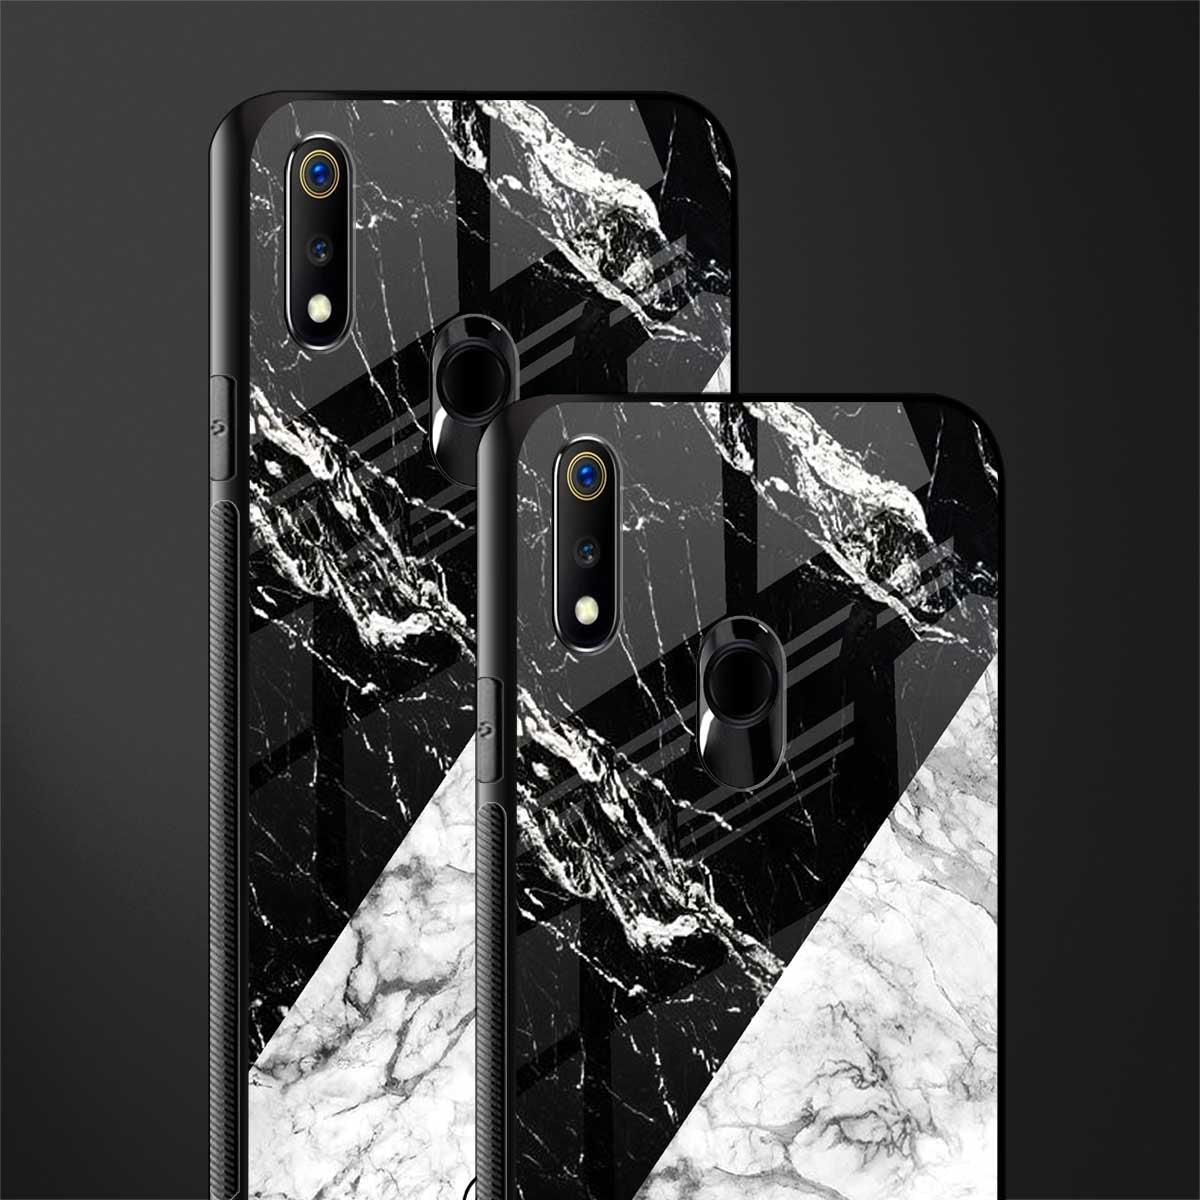 fatal contradiction phone cover for realme 3 pro